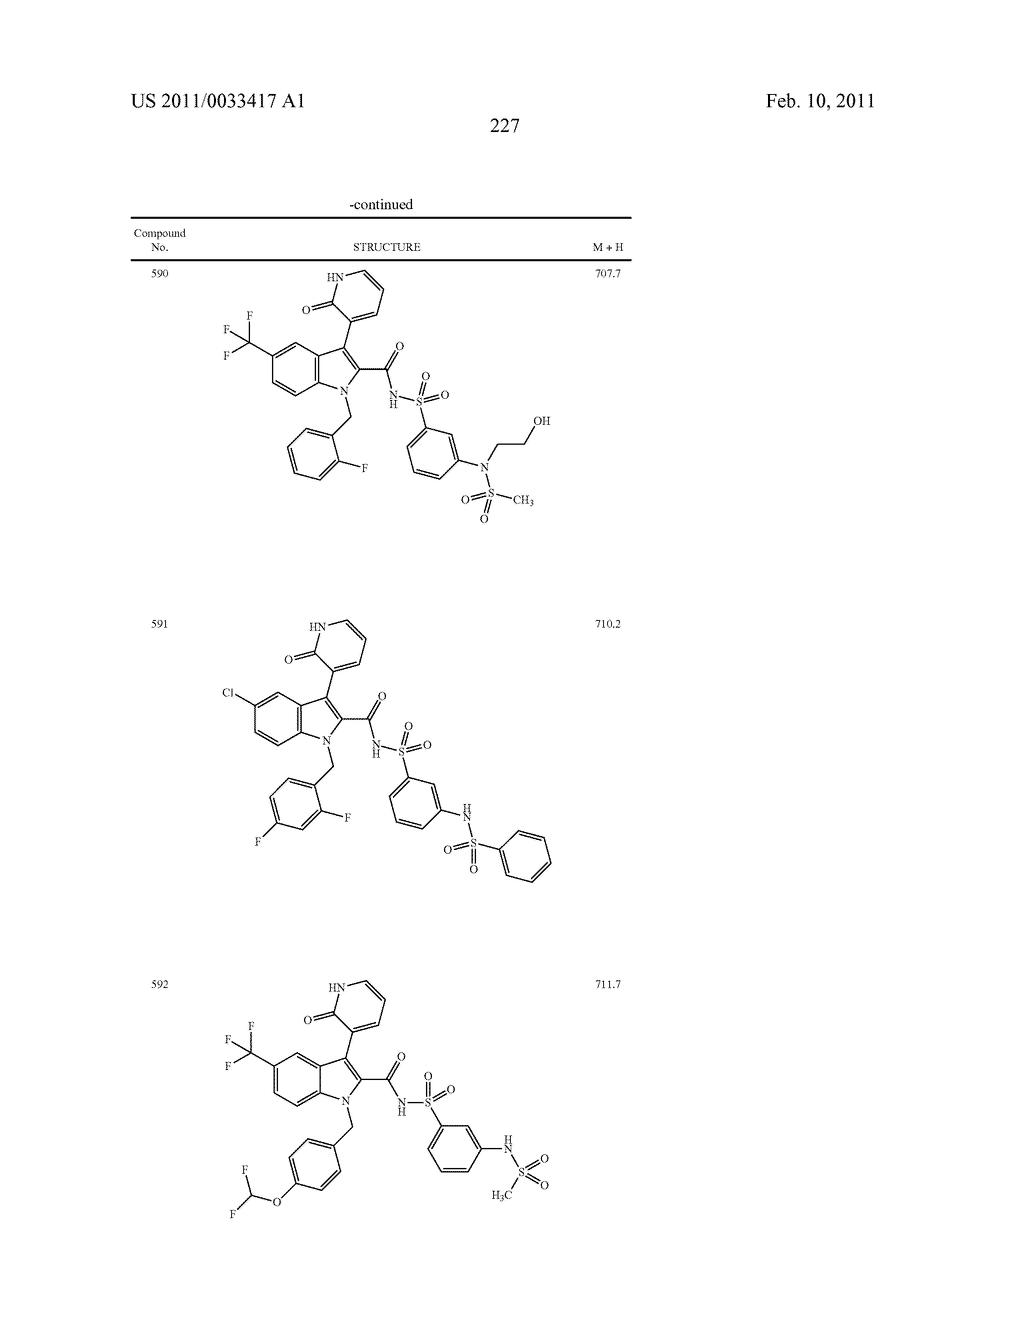 2,3-SUBSTITUTED INDOLE DERIVATIVES FOR TREATING VIRAL INFECTIONS - diagram, schematic, and image 228